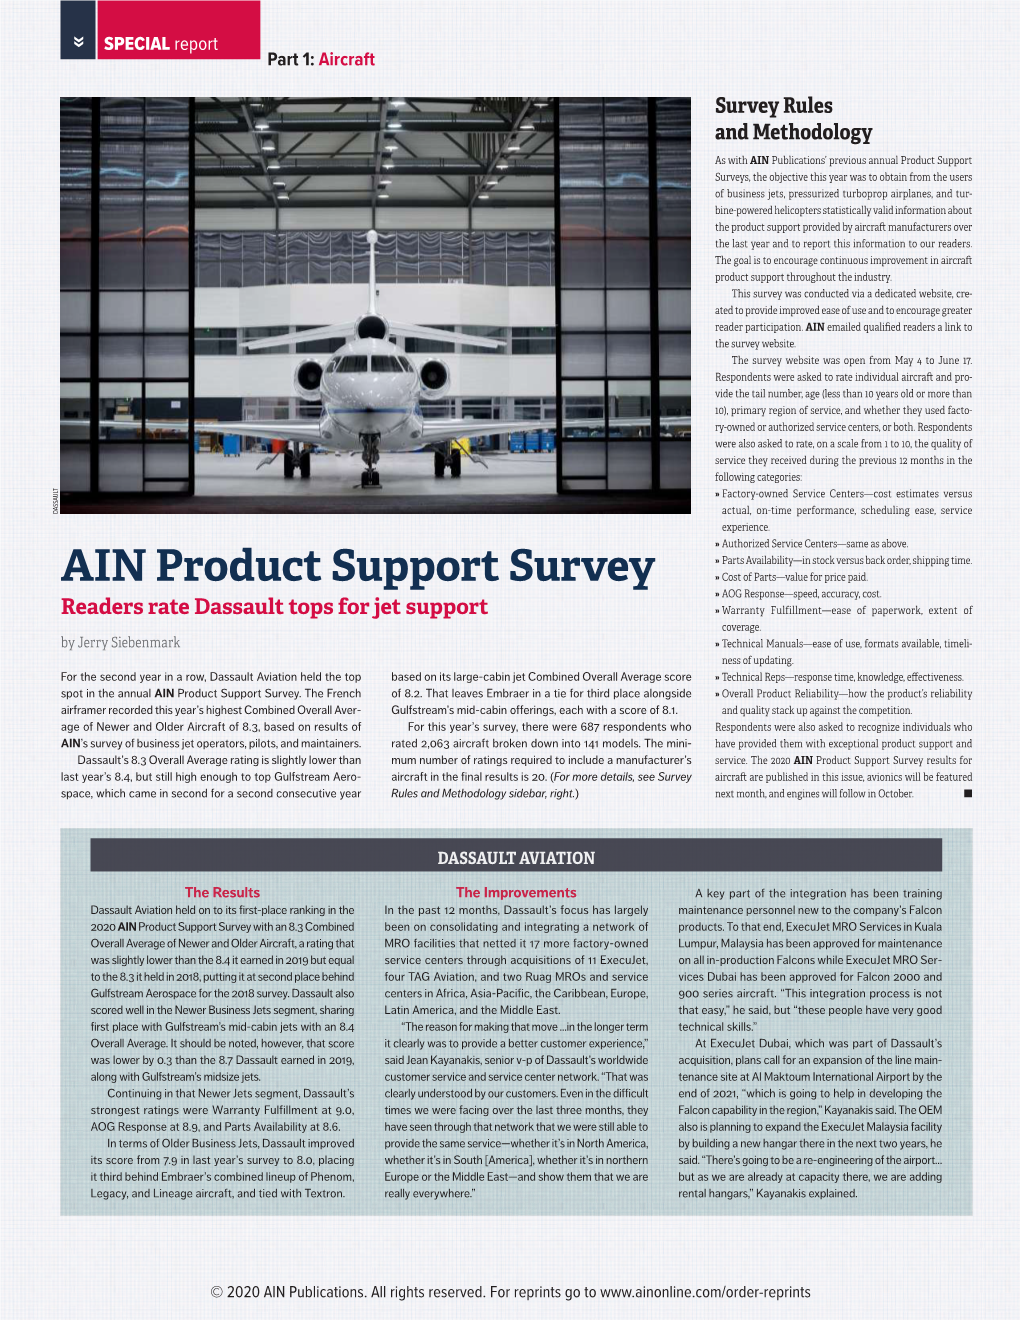 AIN Product Support Survey » Cost of Parts—Value for Price Paid